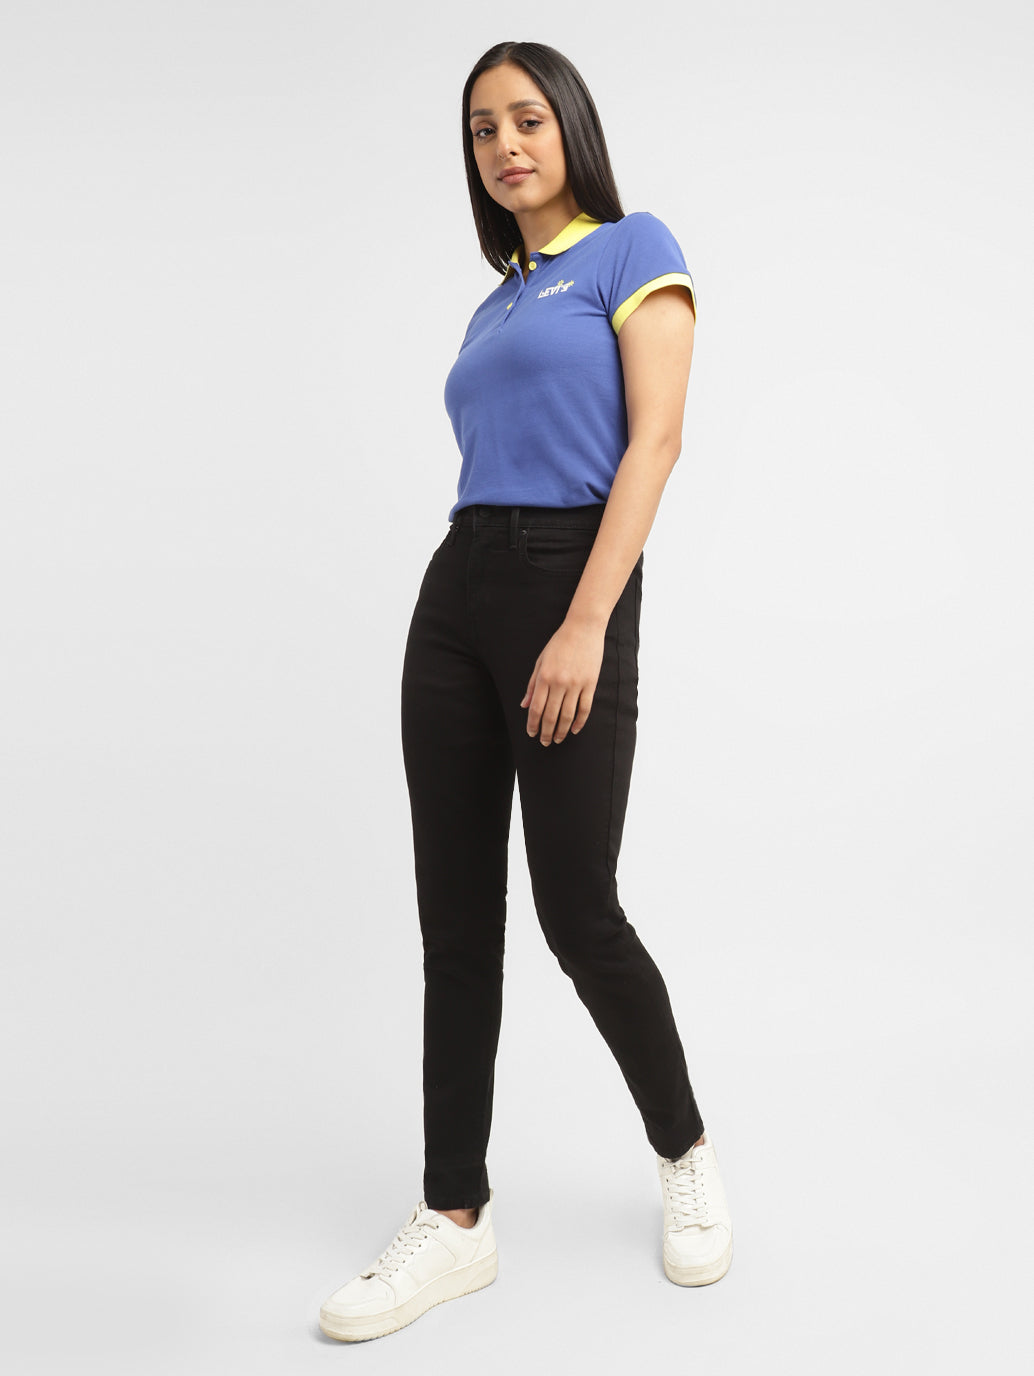 Buy high rise jeans for women online